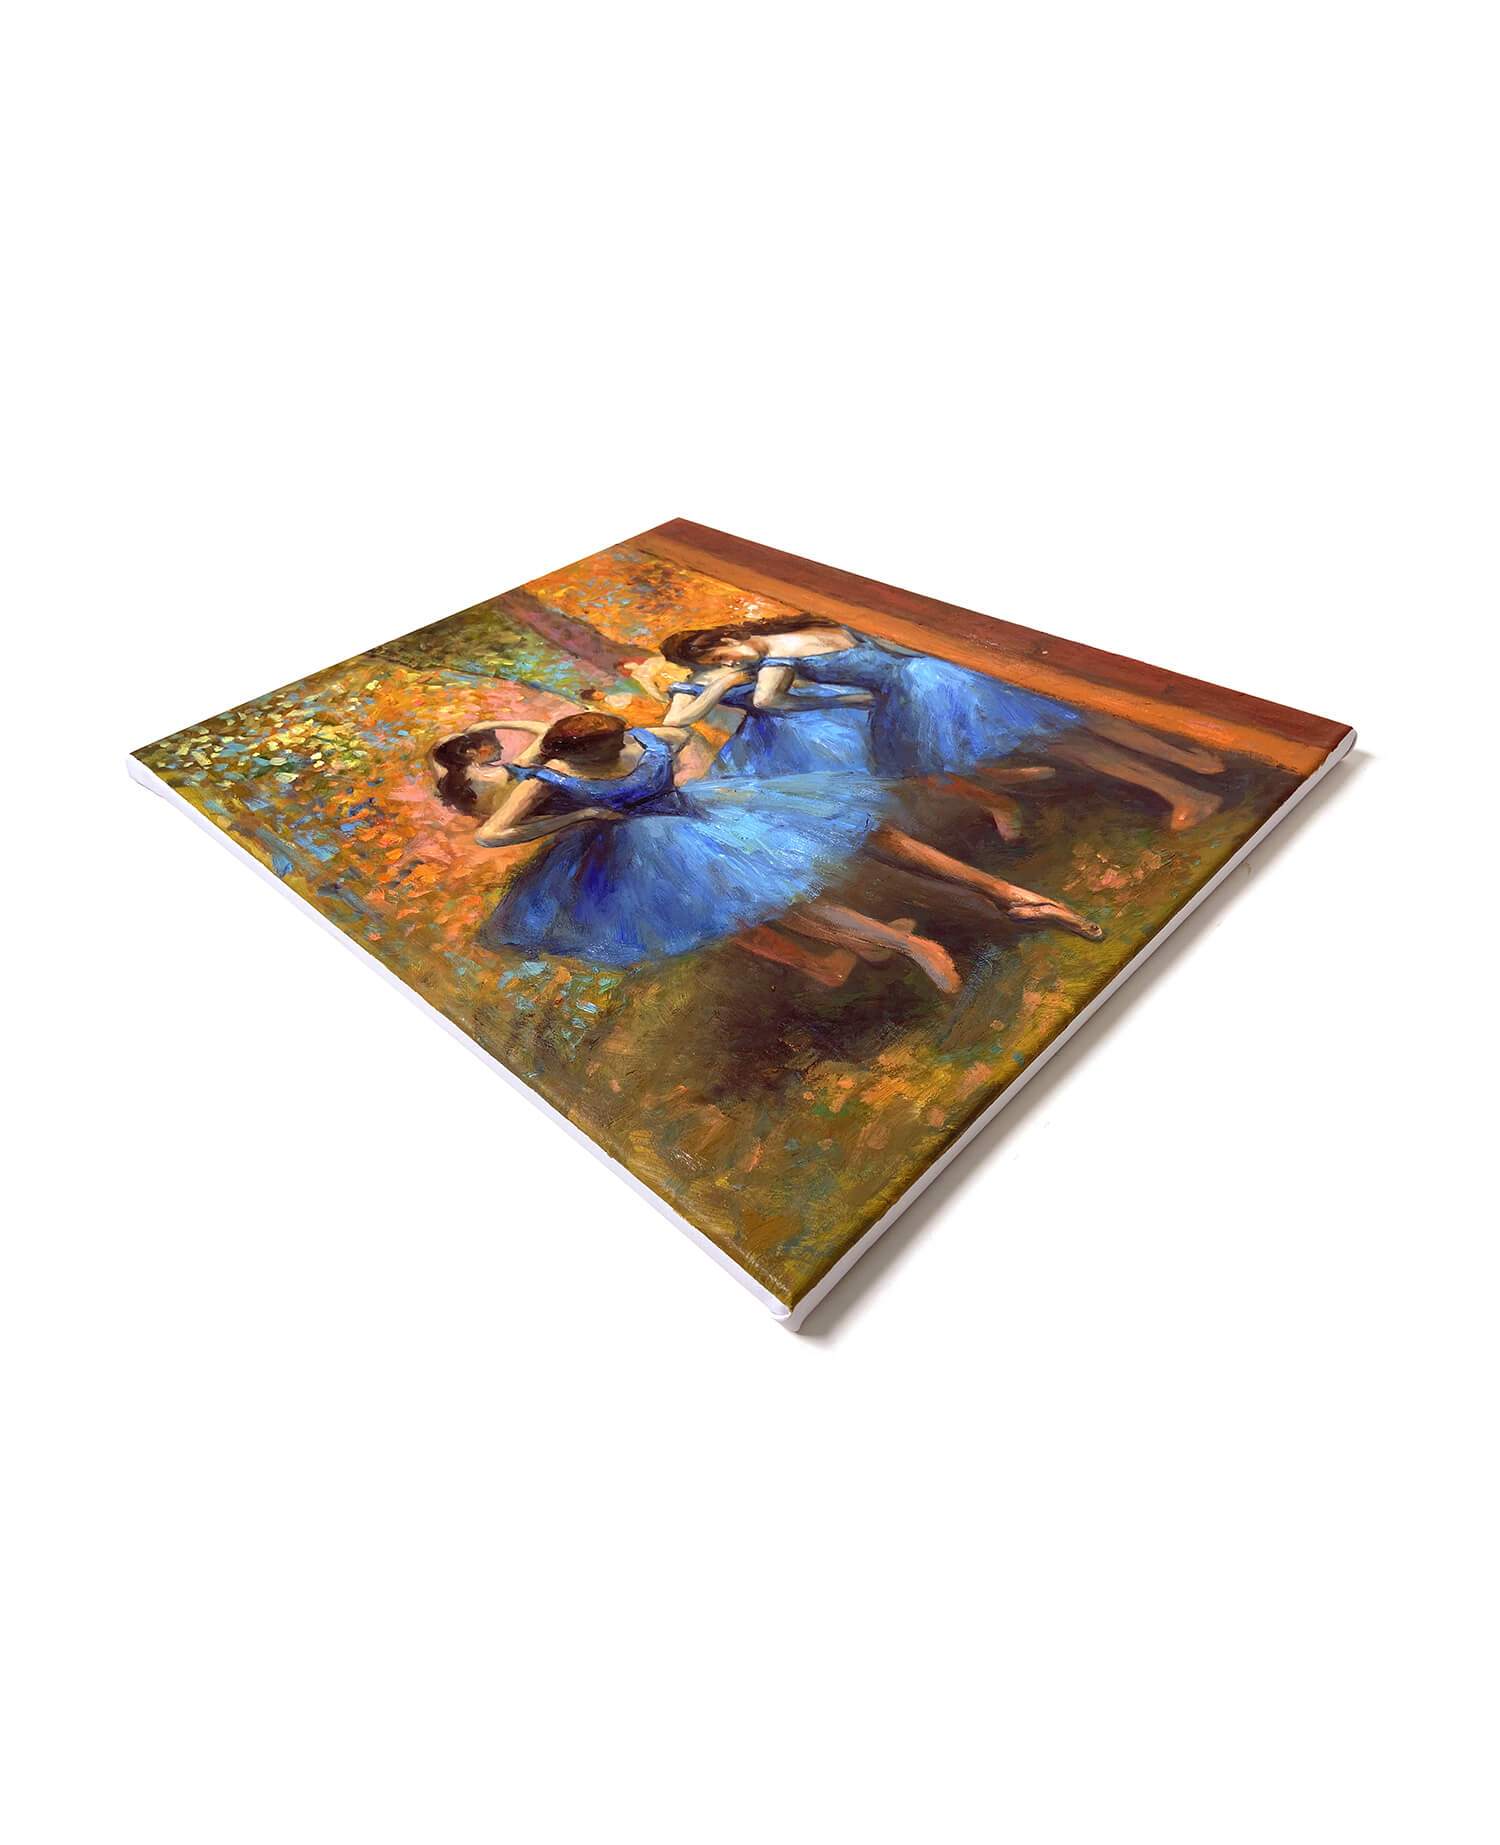 Reproduction Of Blue Dancers By Edgar Degas Galerie Mont Blanc 